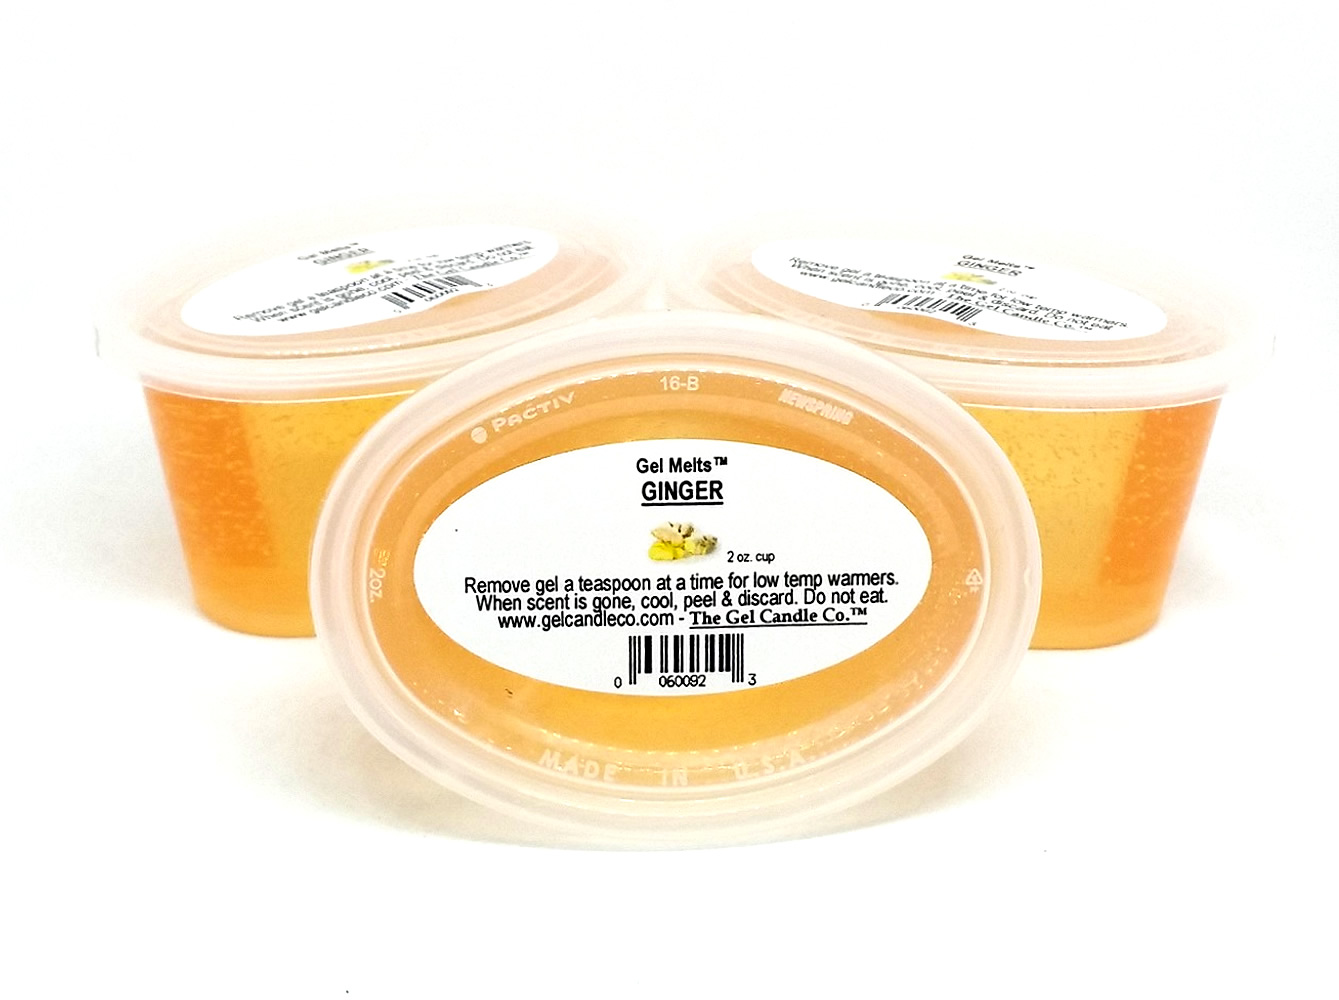 Ginger scented Gel Melts™ Gel Wax for warmers - 3 pack